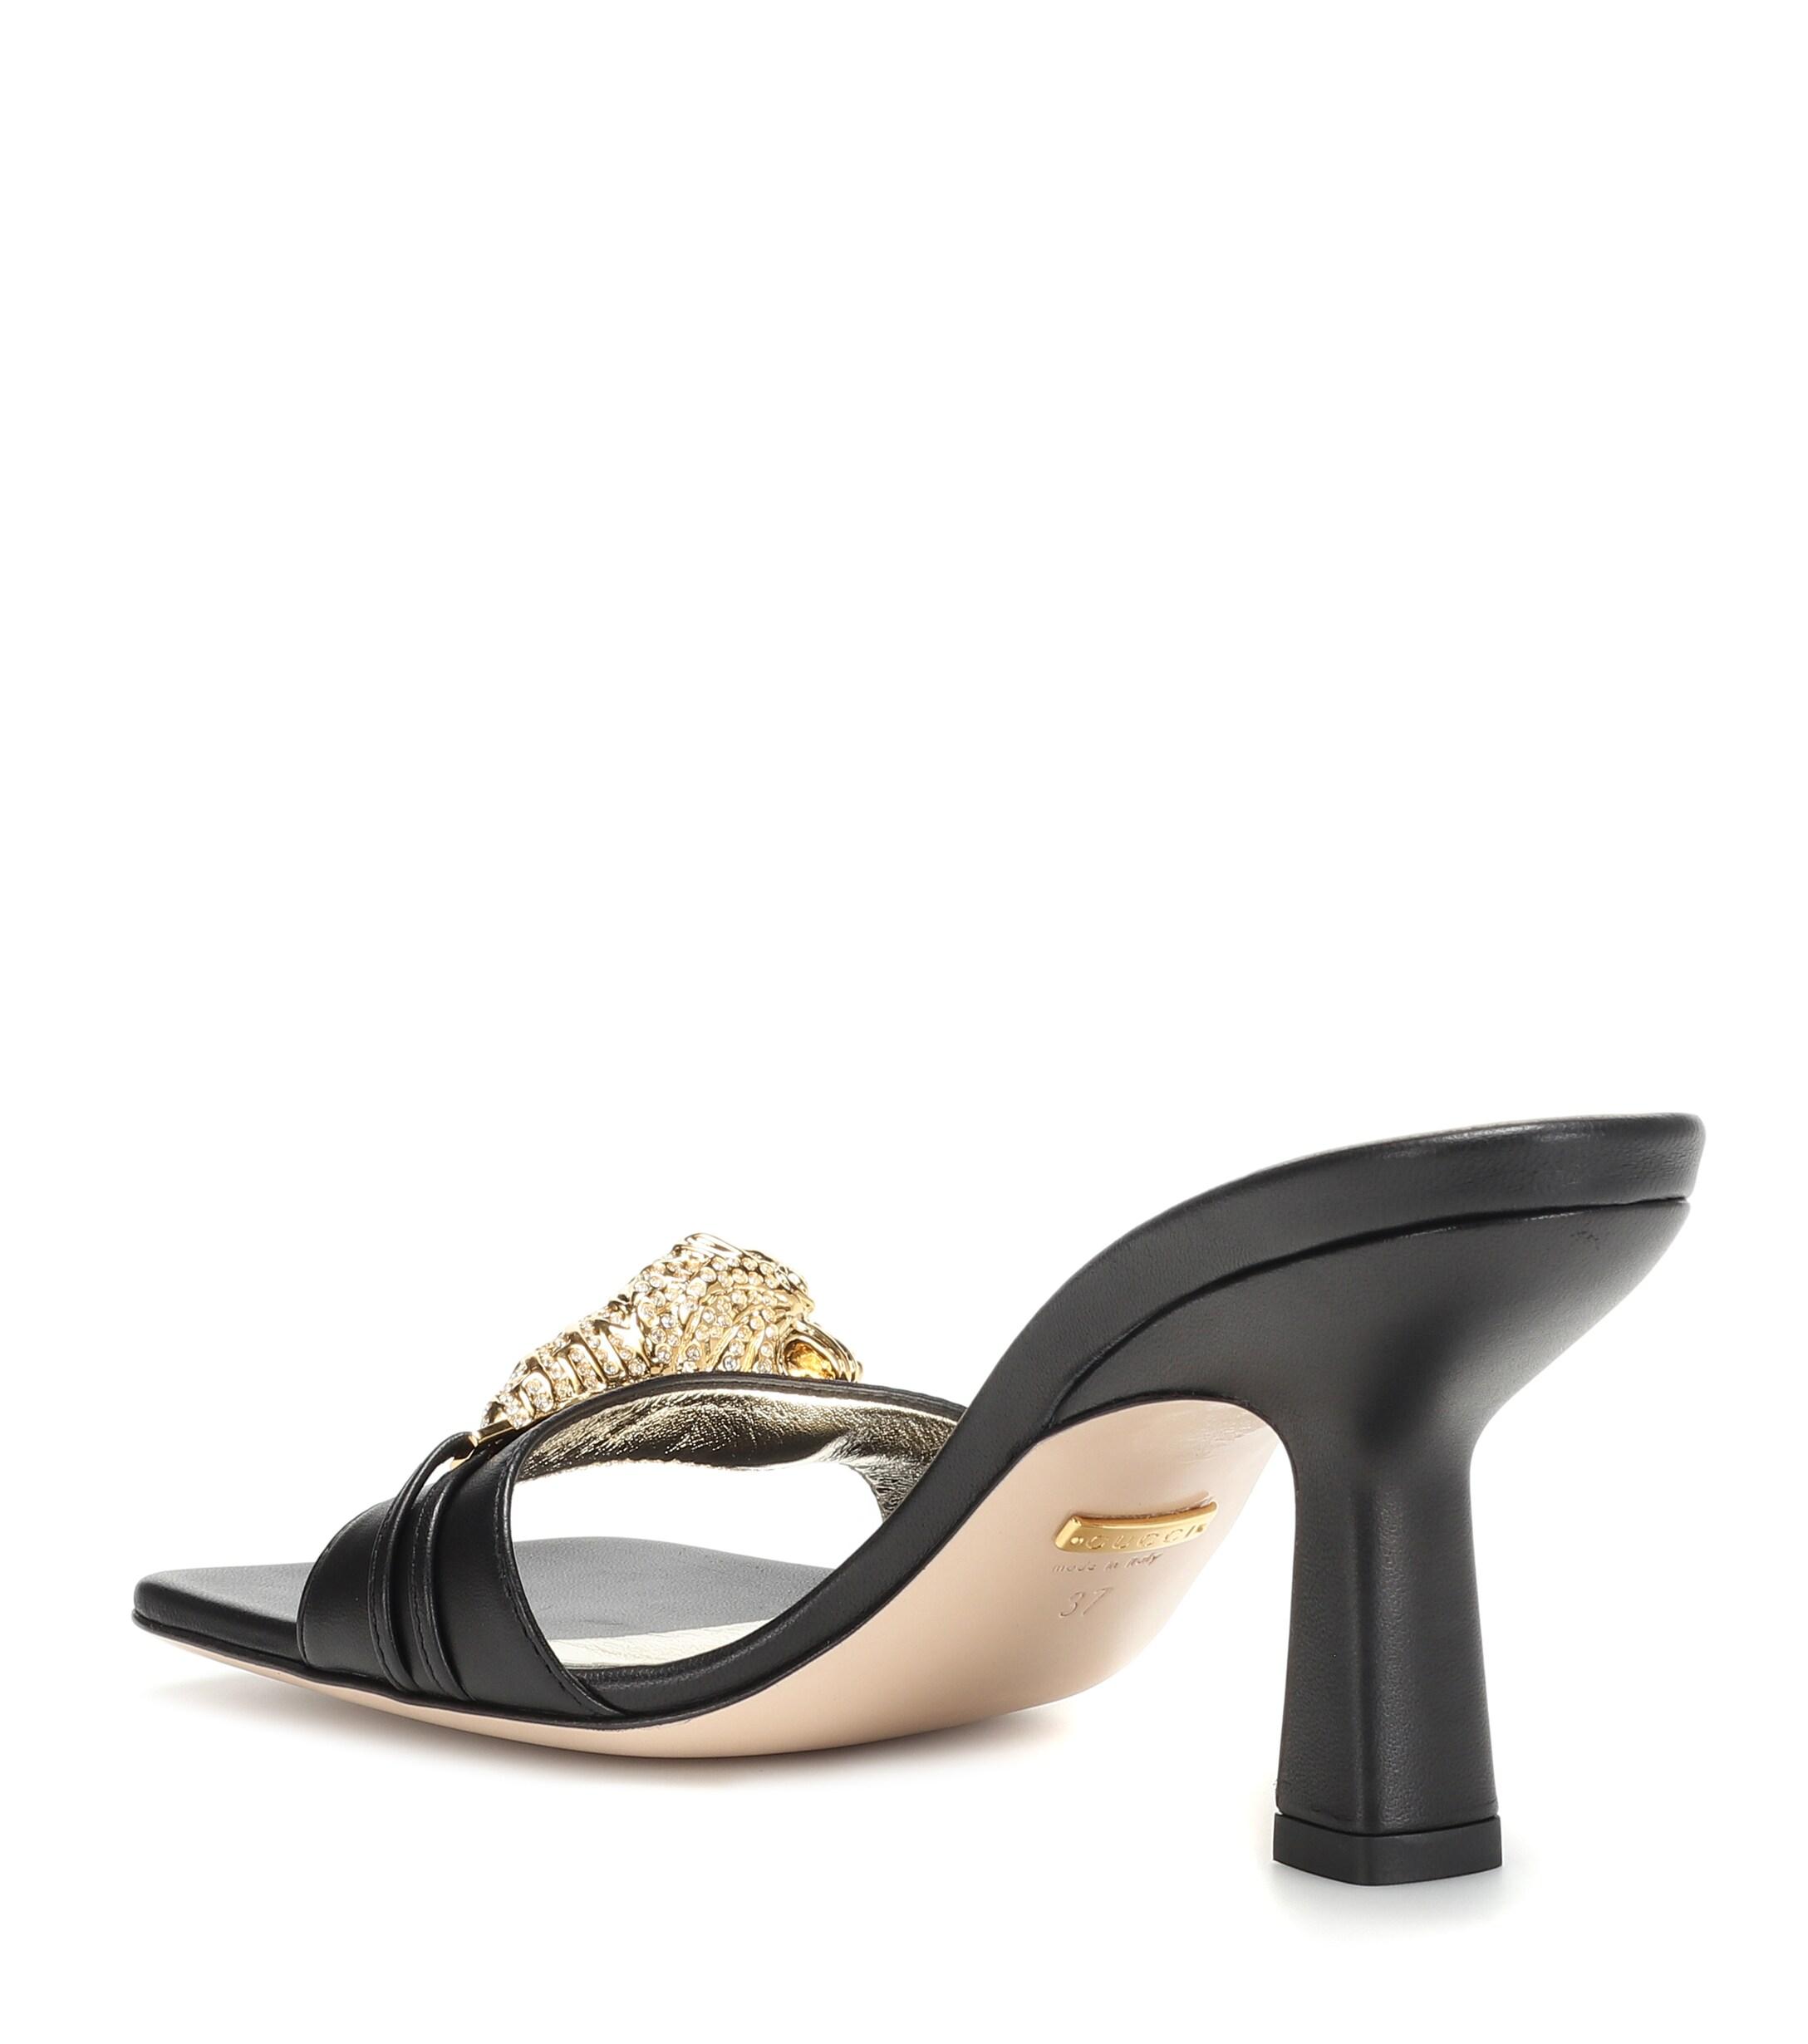 Gucci Leather Tiger Head Sandals in Black | Lyst